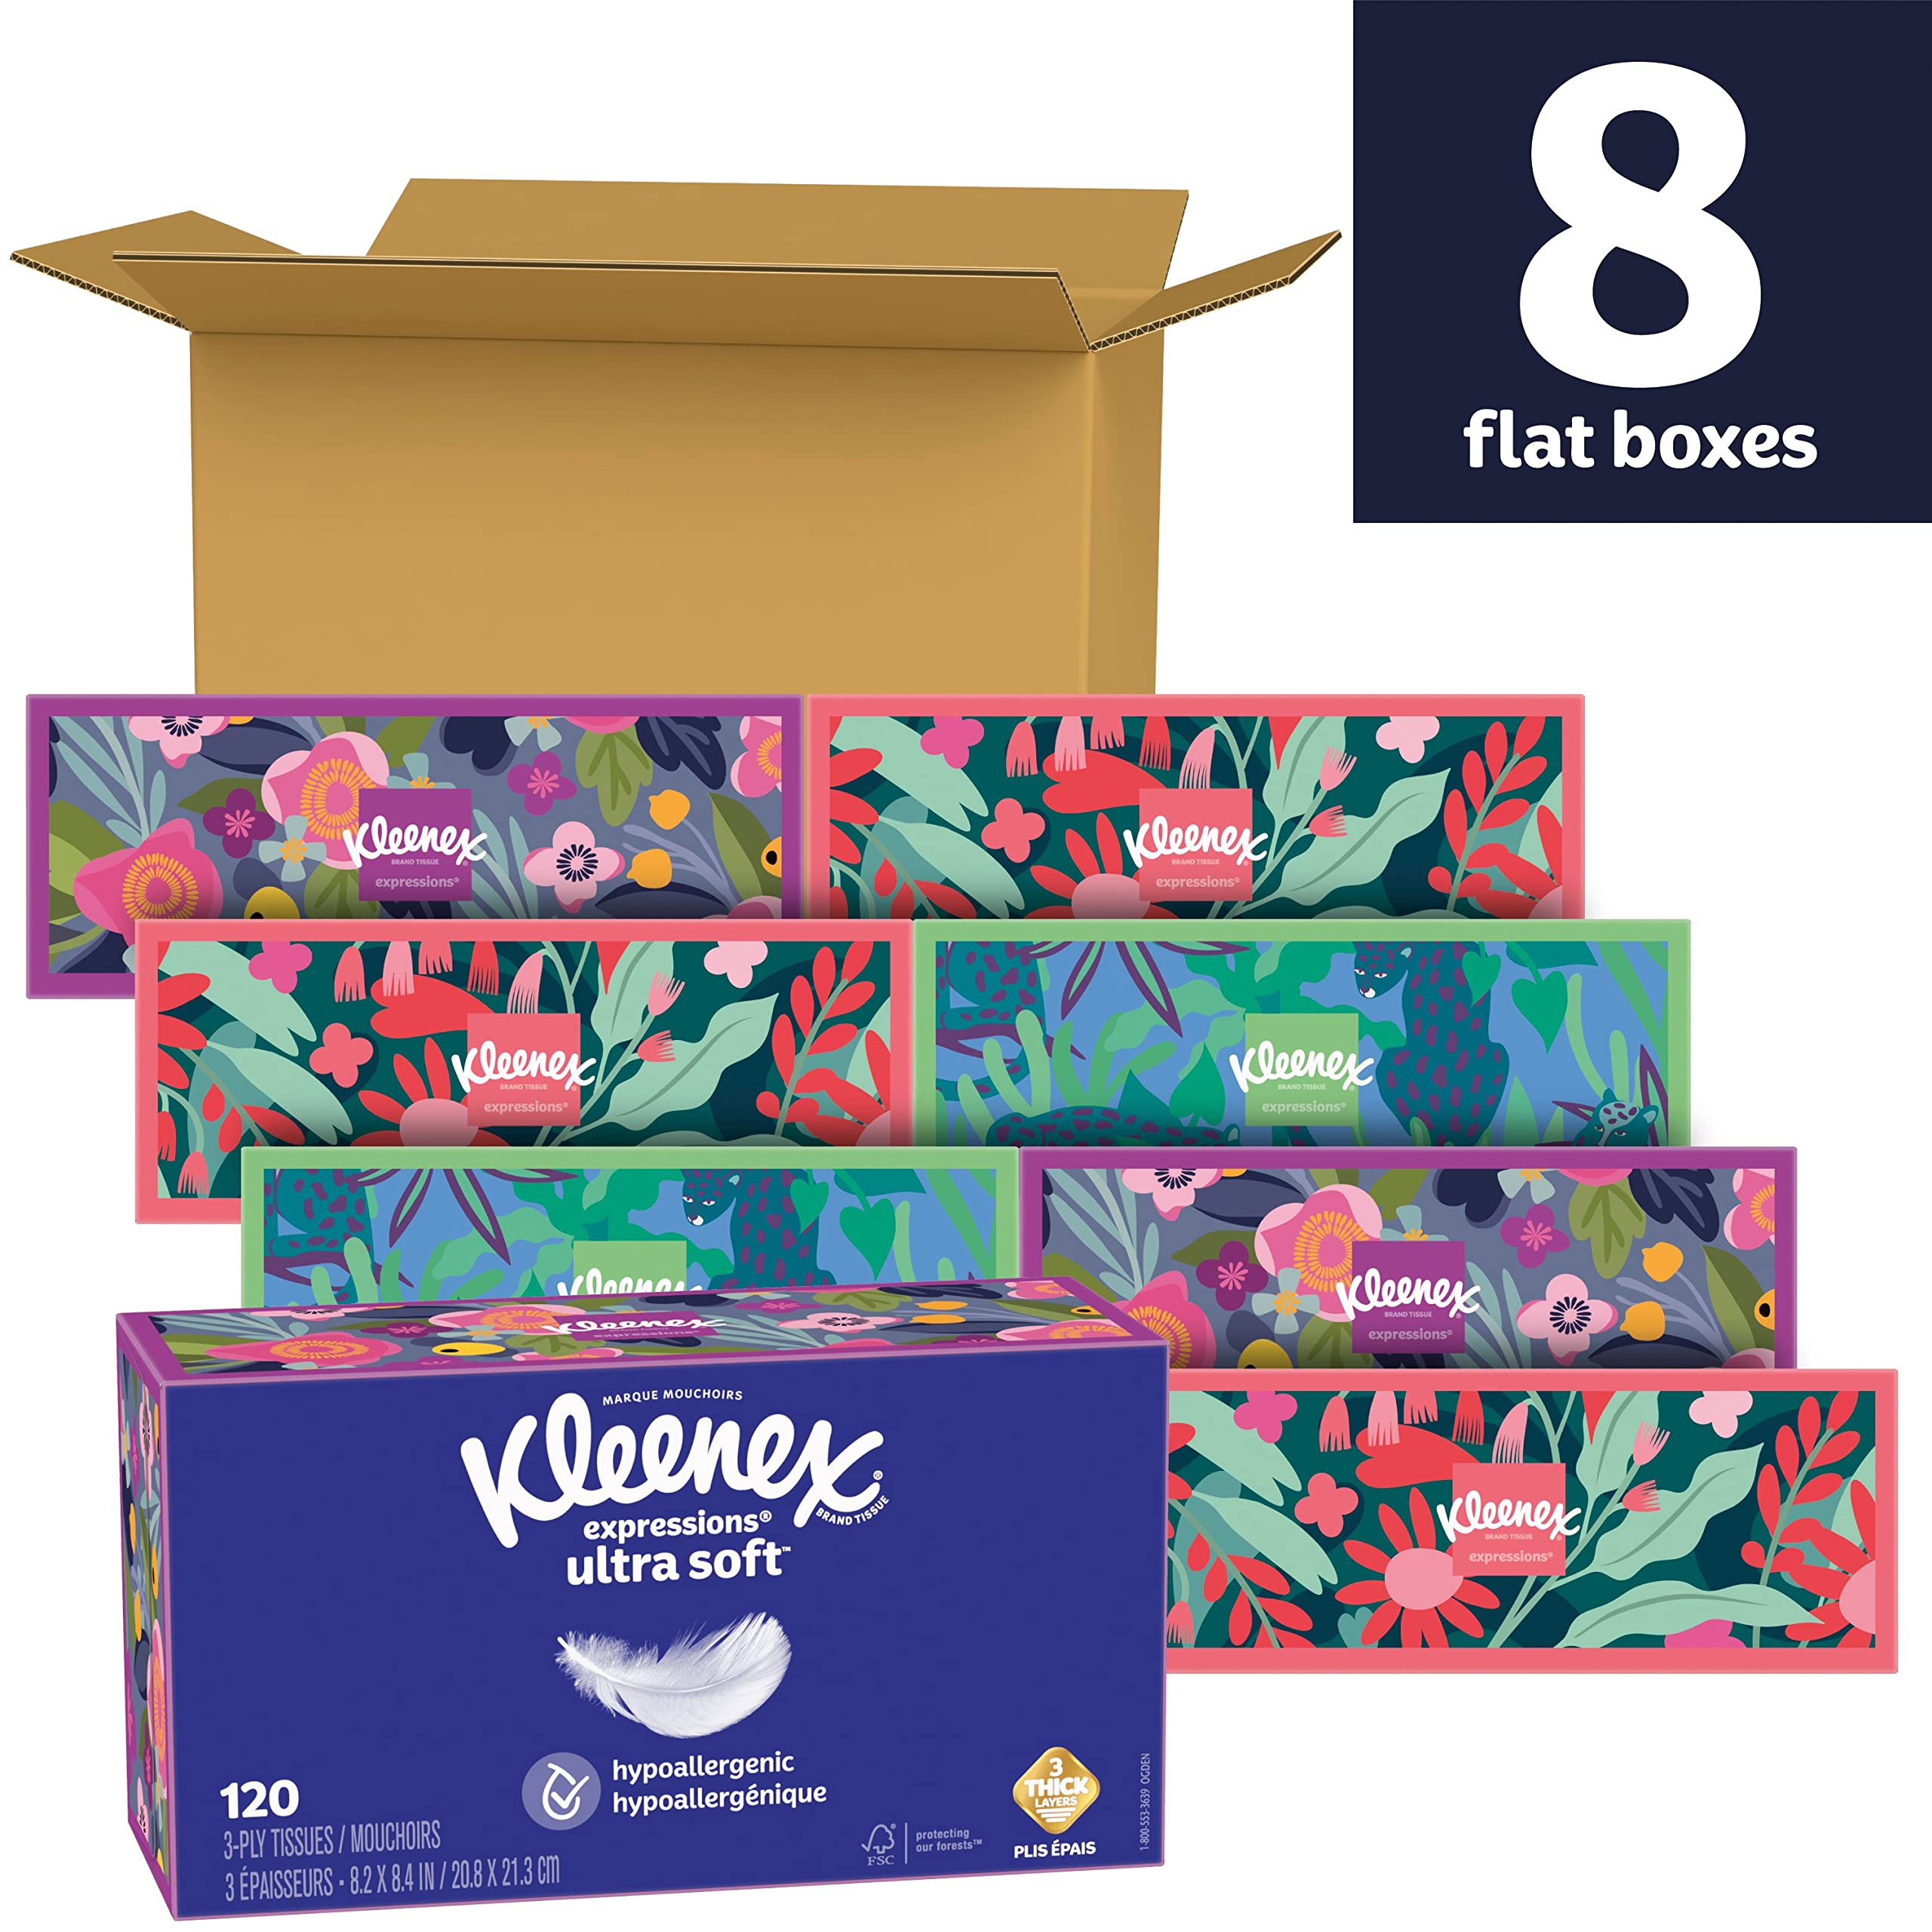 GE WC60X5015 Genuine OEM Heavy Duty Compactor Bag (12 Count) for GE Trash Compactors & Kleenex Expressions Ultra Soft Facial Tissues, Soft Facial Tissue, 8 Flat Boxes, 120 Tissues per Box, 3-Ply